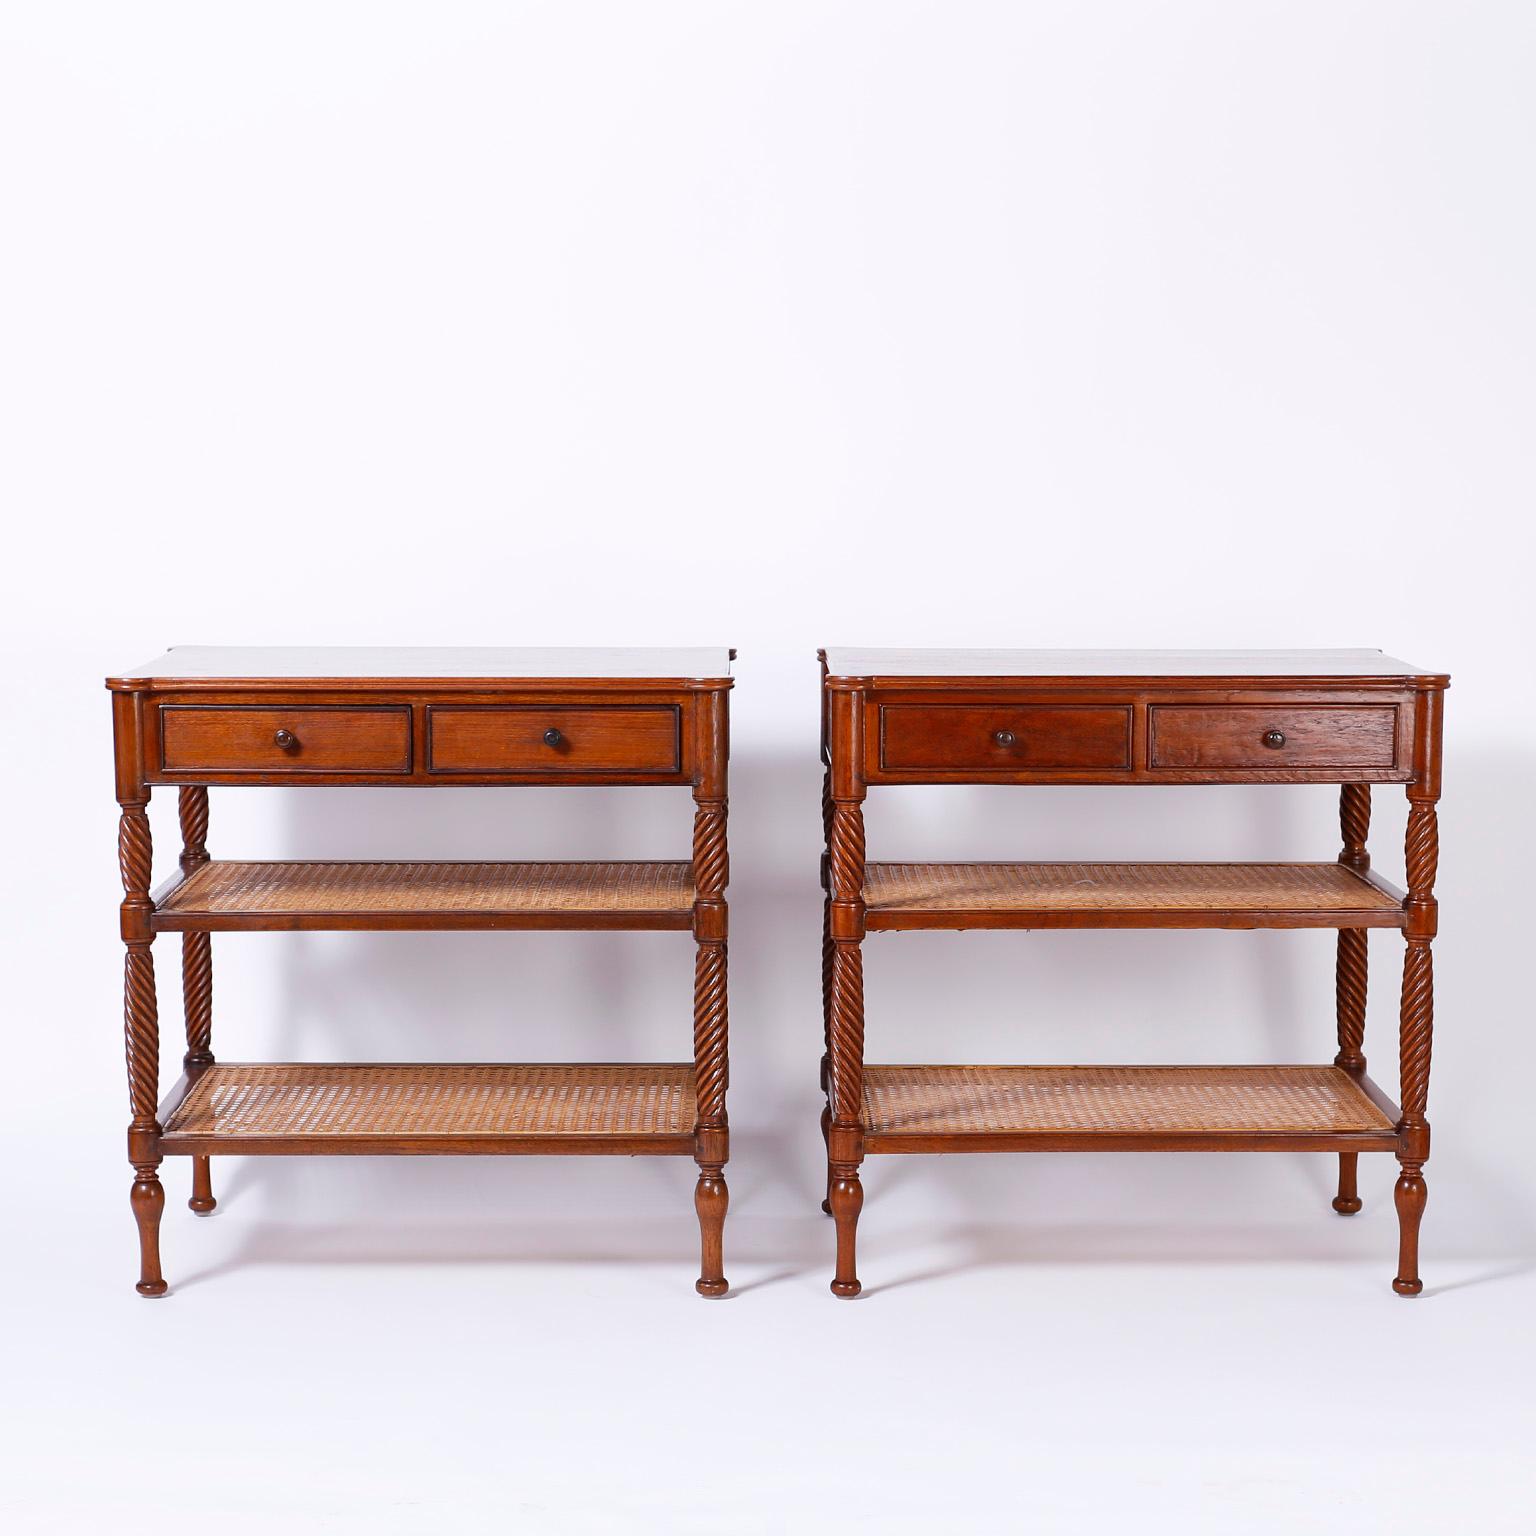 Handsome pair of mahogany nightstands or end tables with two drawers at the top over two hand canned lower tiers supported by carved barley twist posts on turned feet.